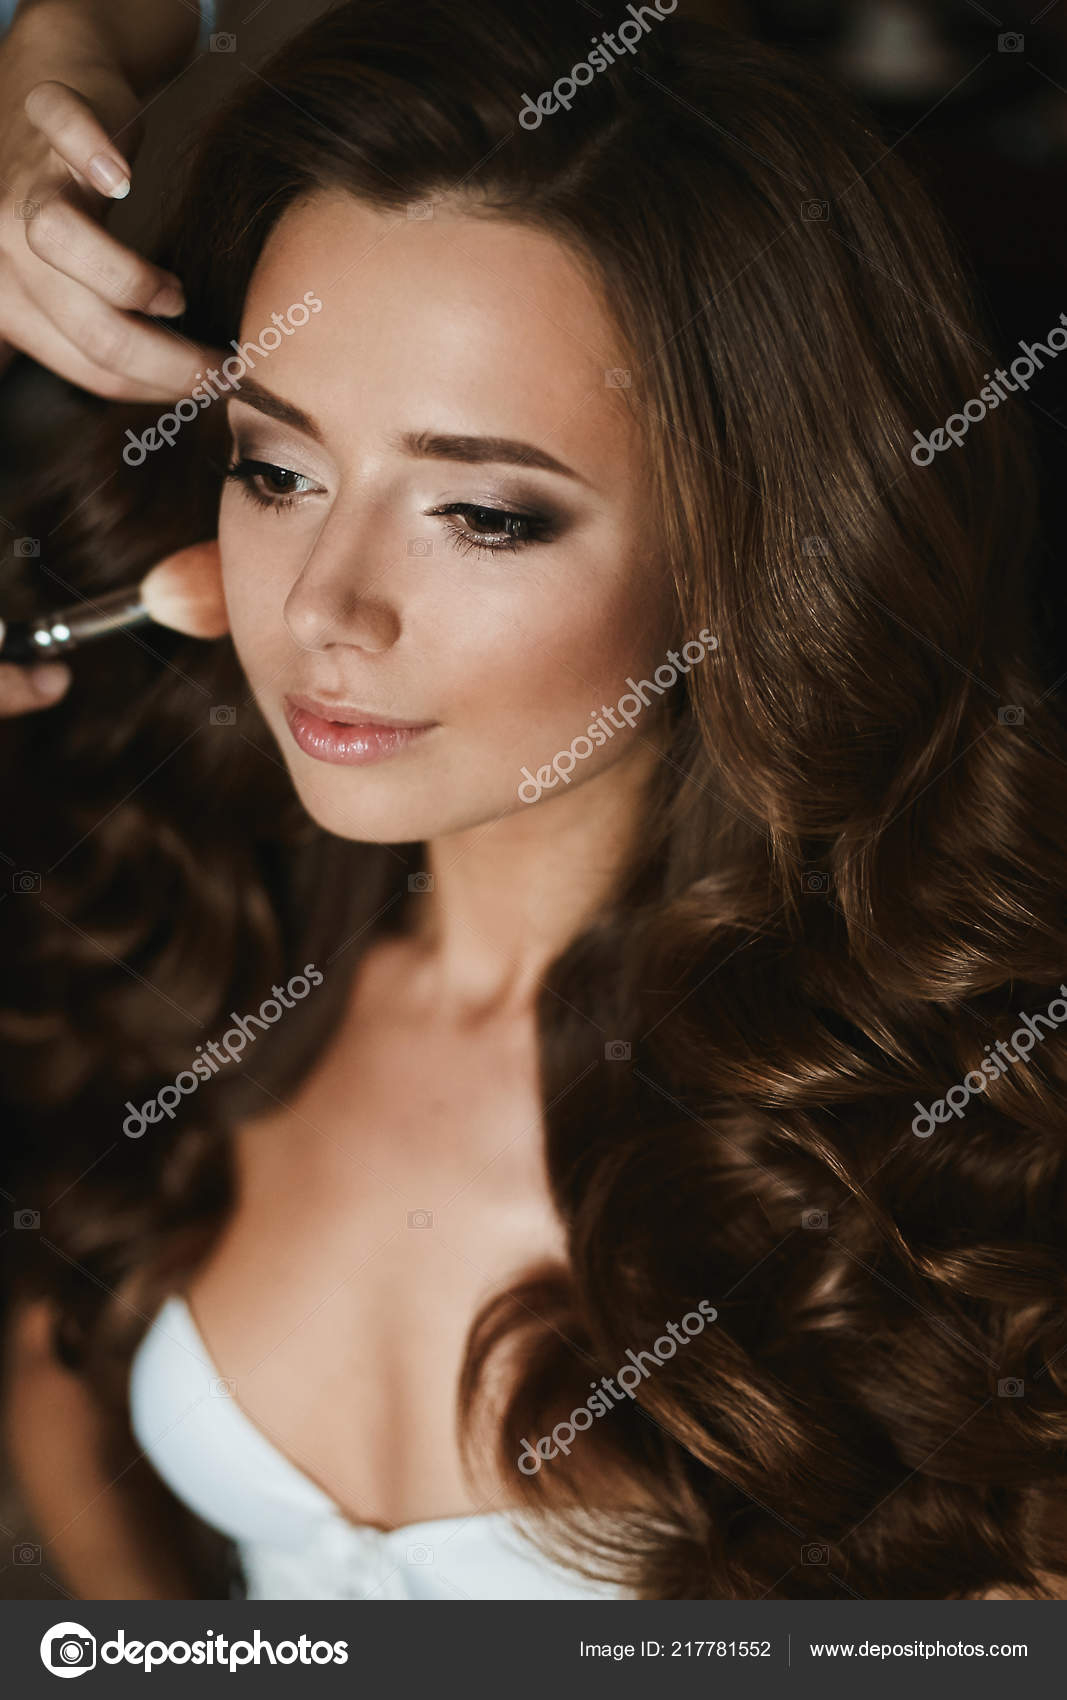 Wedding Makeup Looks For Brunettes With Brown Eyes Make Up Artist Applies Wedding Makeup For A Beautiful Brunette Model